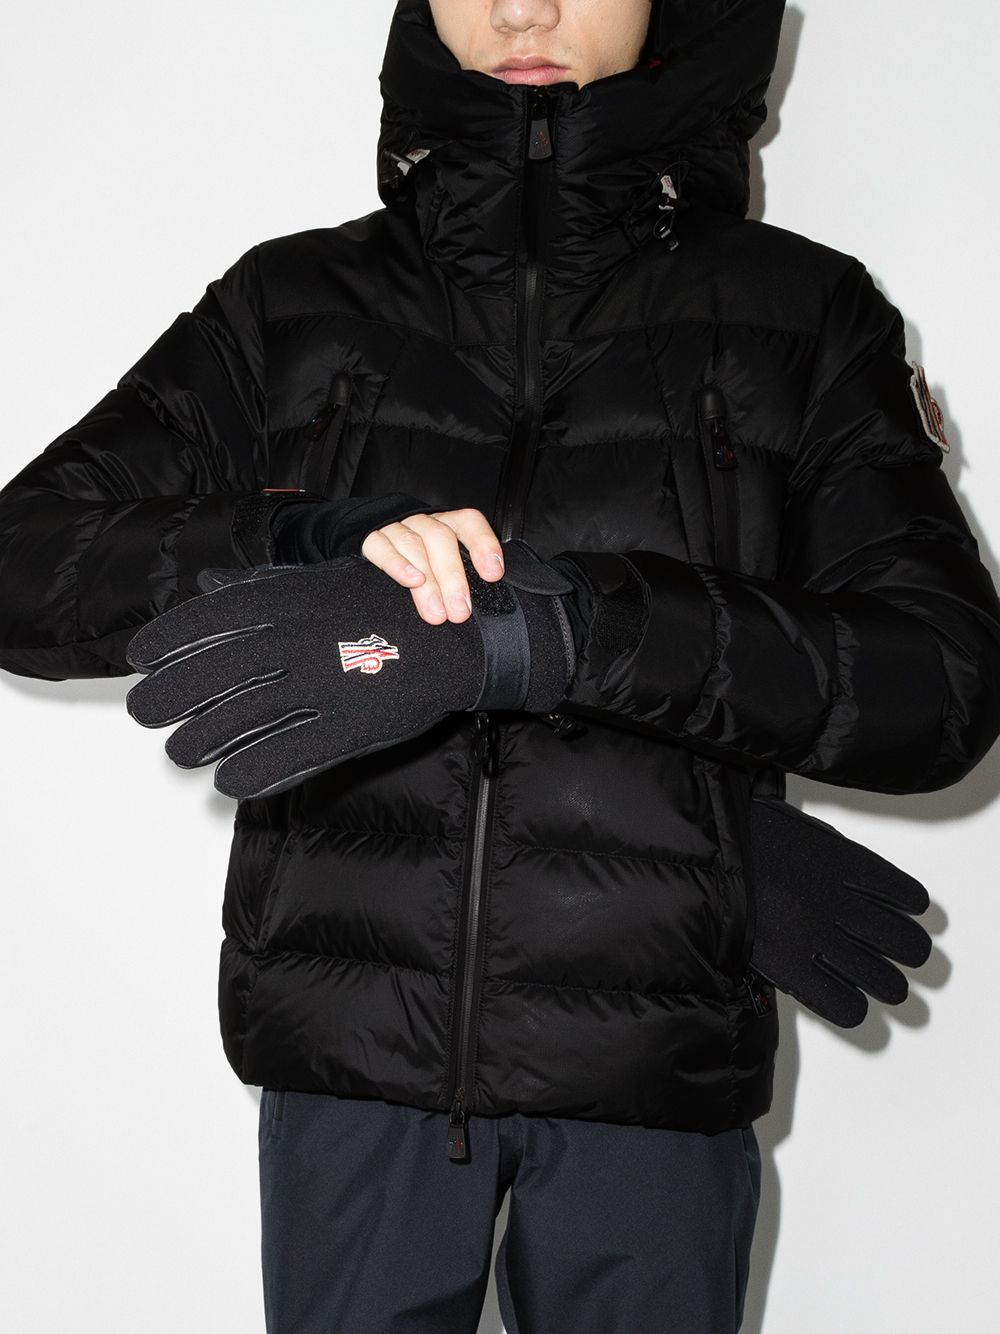 Moncler Grenoble Camurac Hooded Puffer Jacket - Farfetch